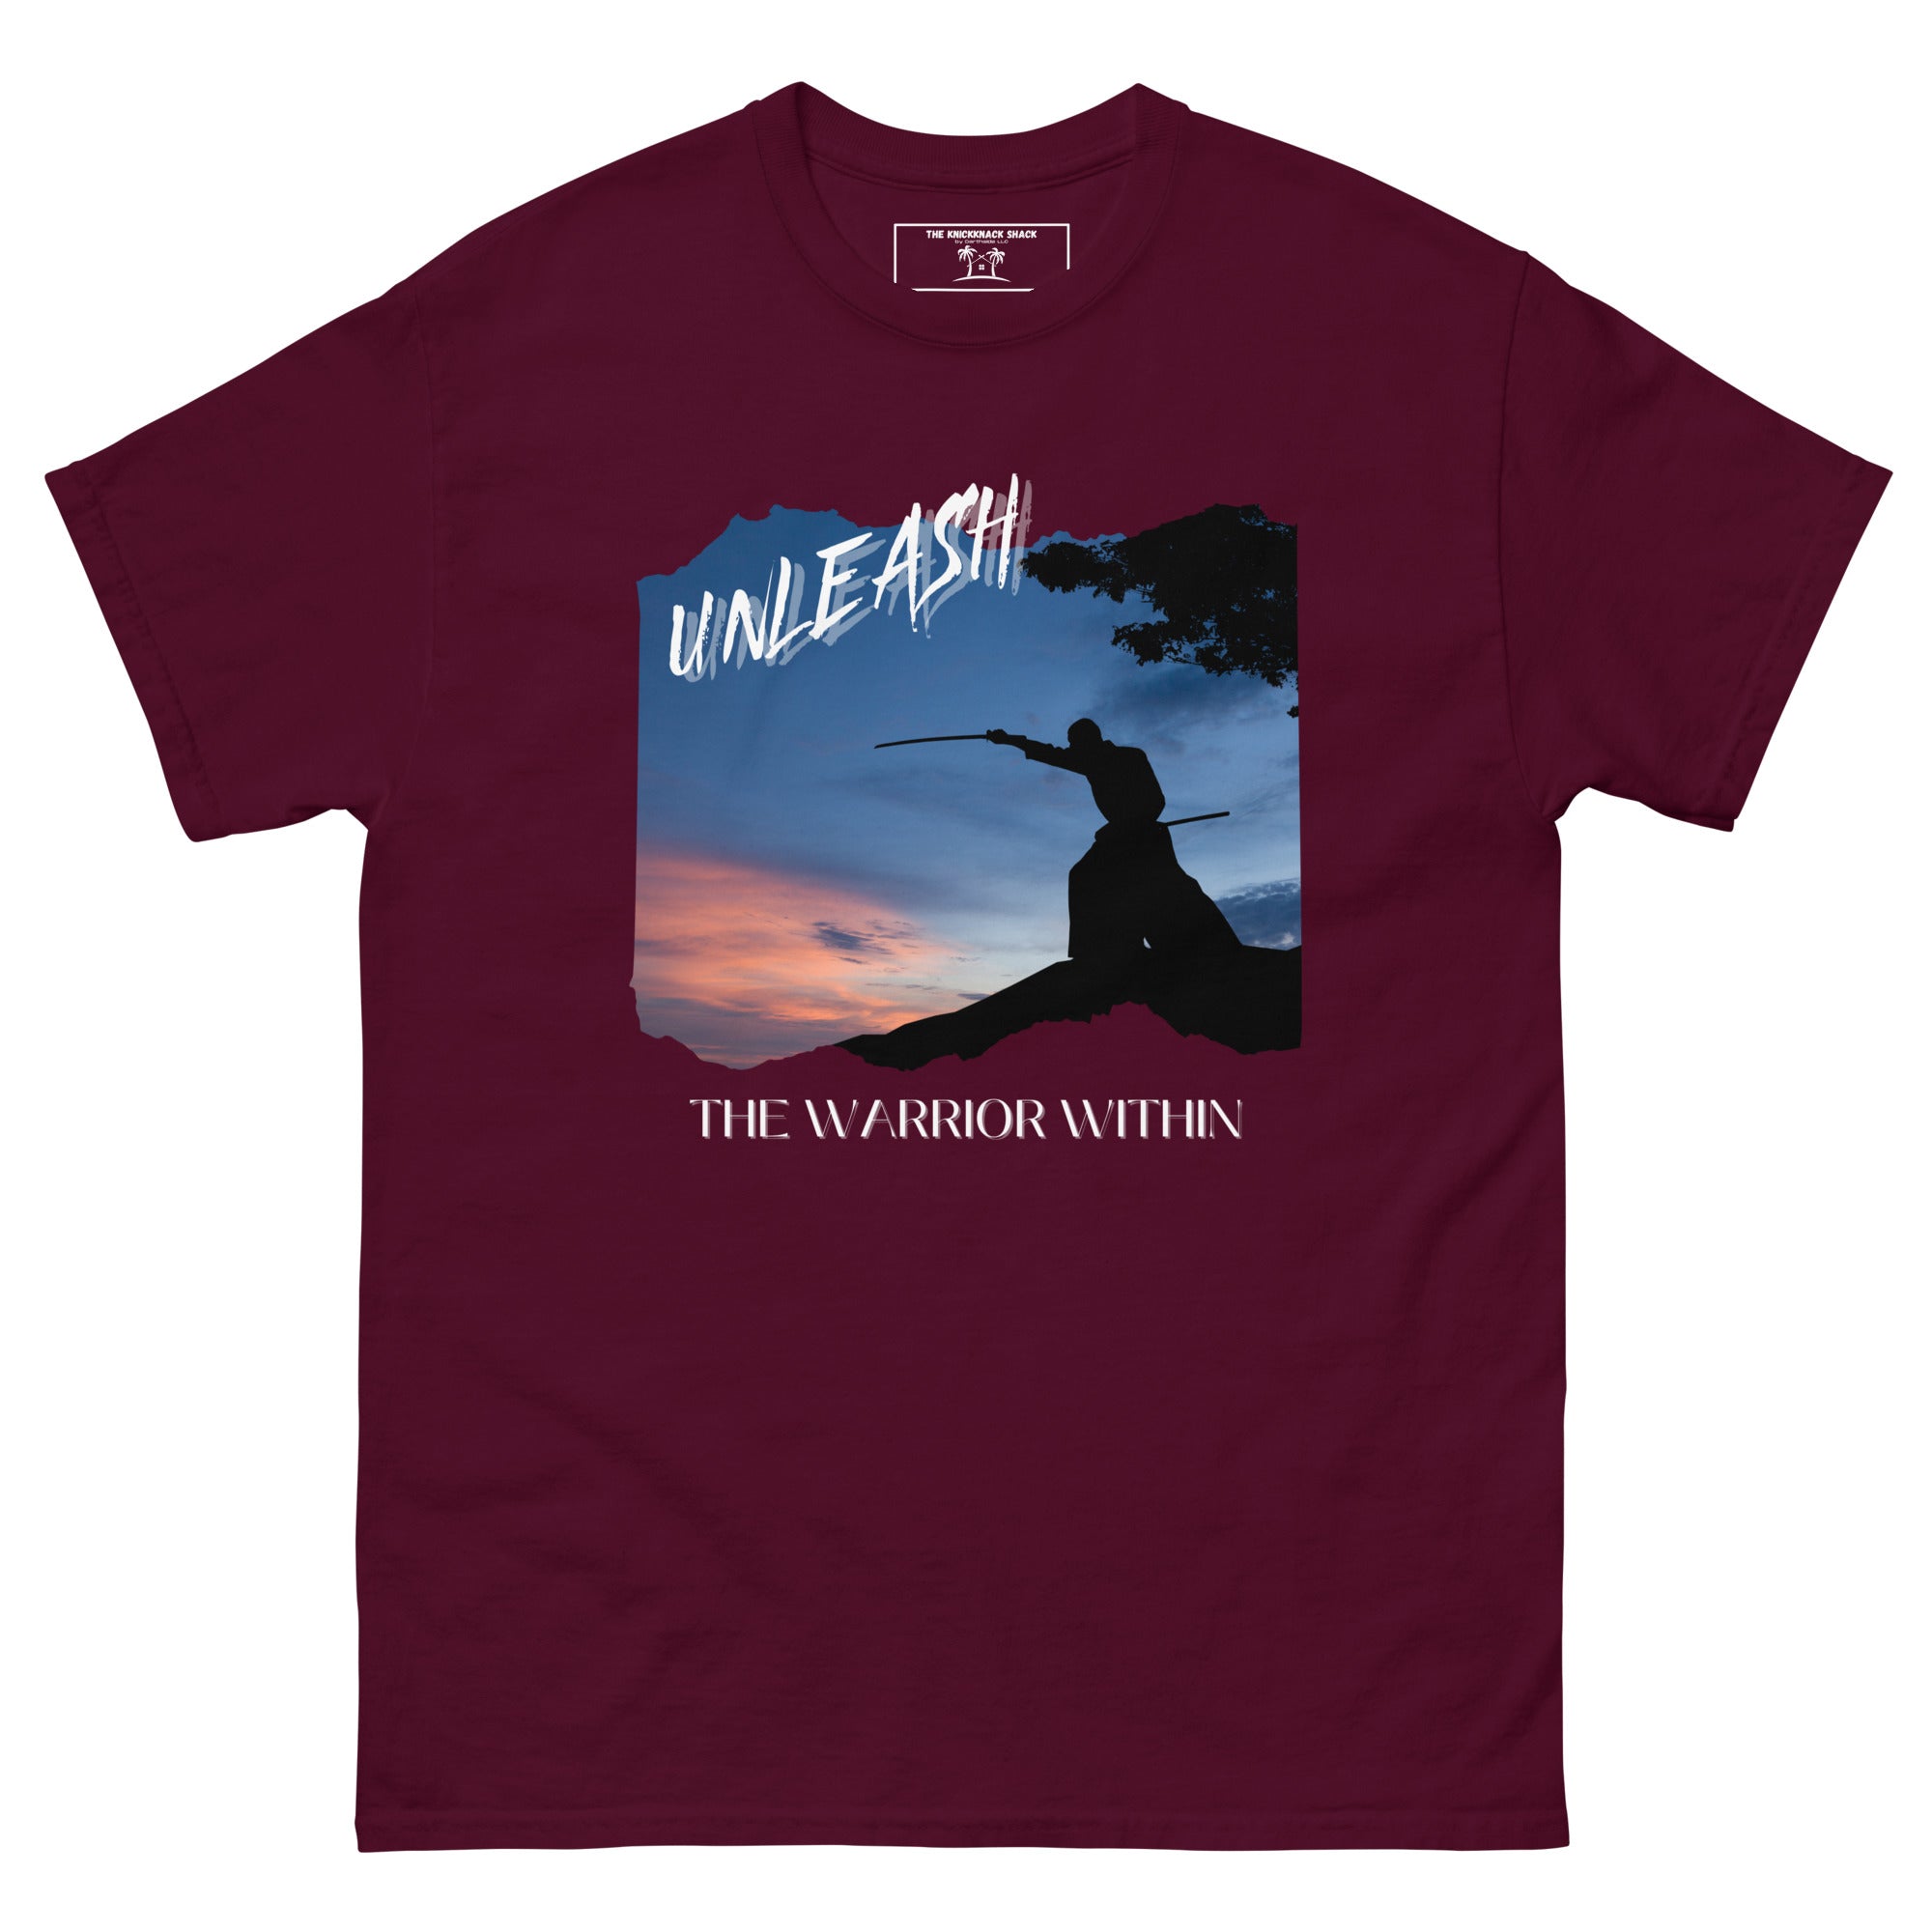 Classic Tee - Warrior Within 2 (Dark Colors)